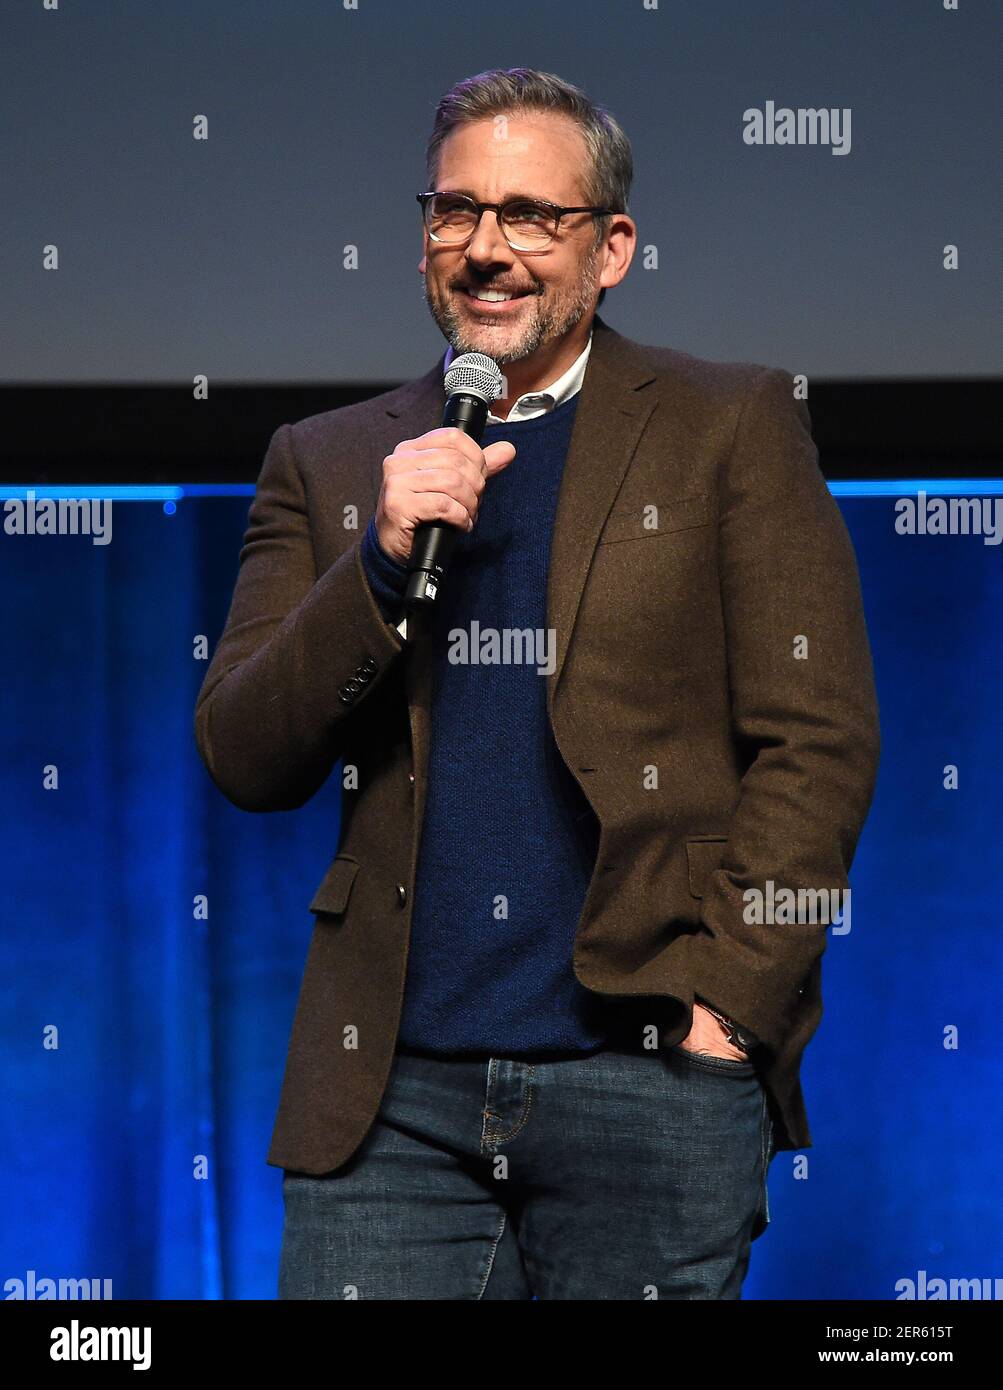 LAS VEGAS, NV - APRIL 26: Steve Carell onstage during the Amazon Studios  presentation at CinemaCon 2018